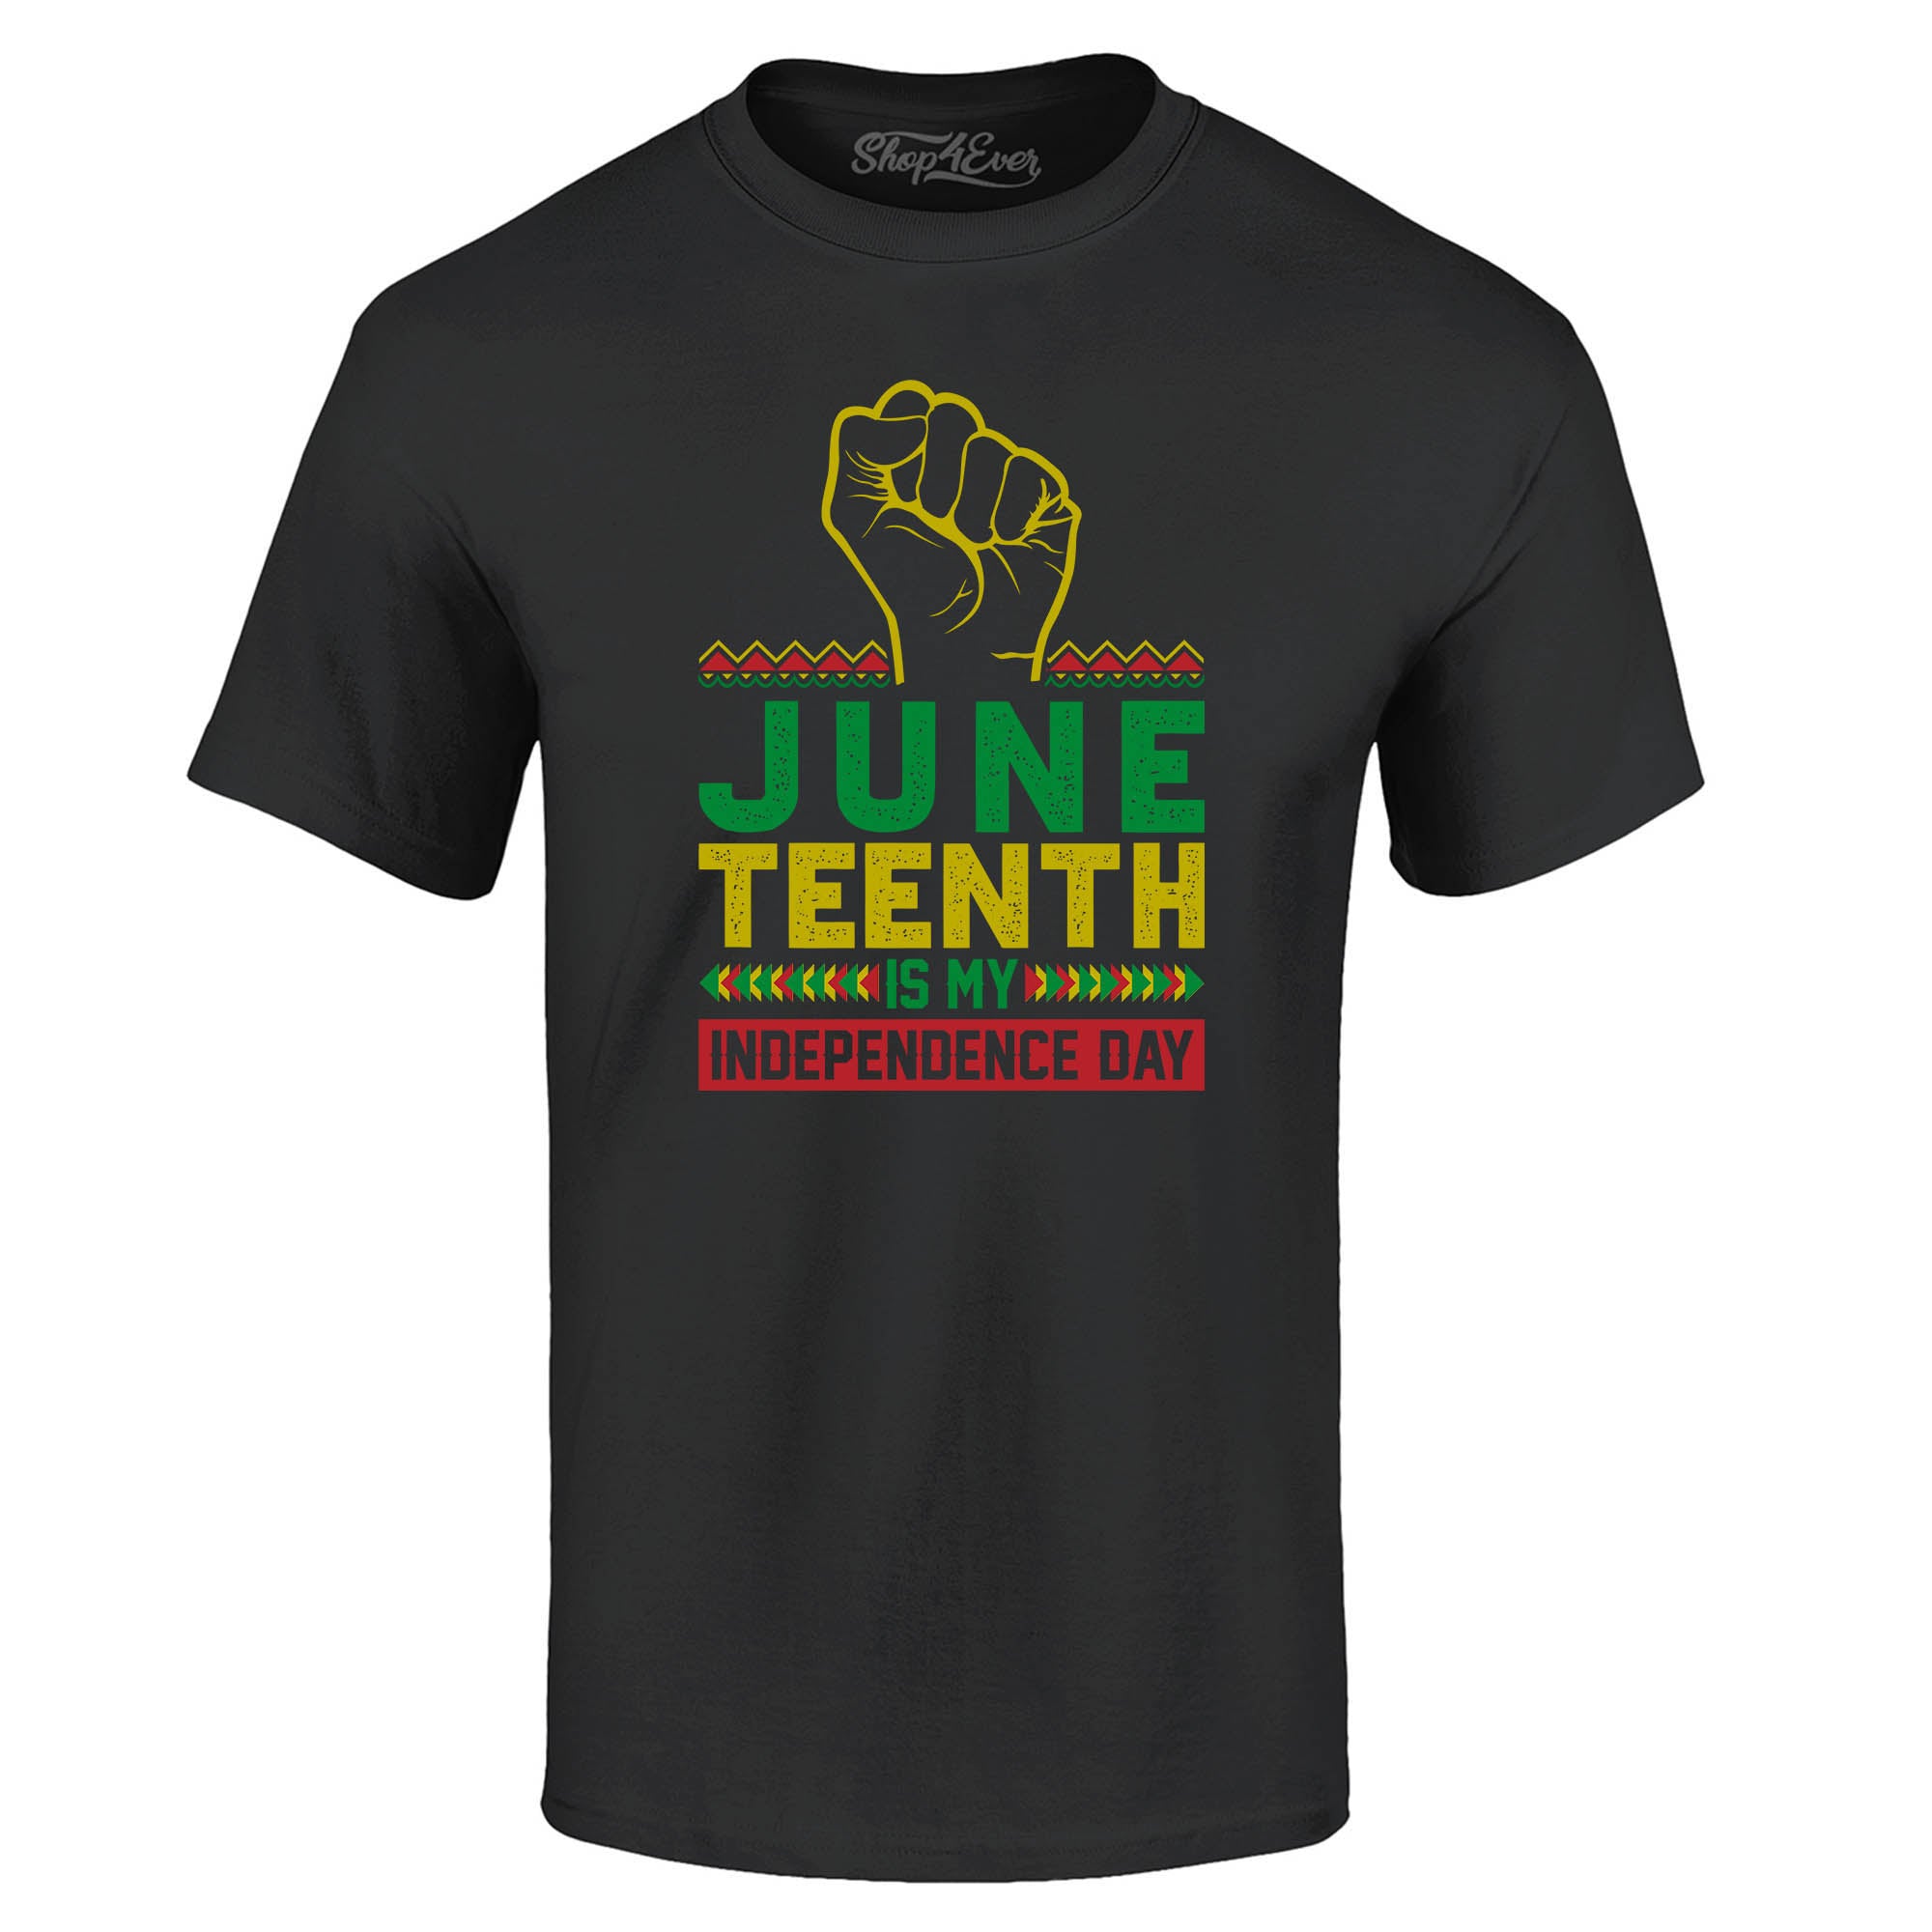 Juneteenth is My Independence Day June 19th 1865 T-Shirt